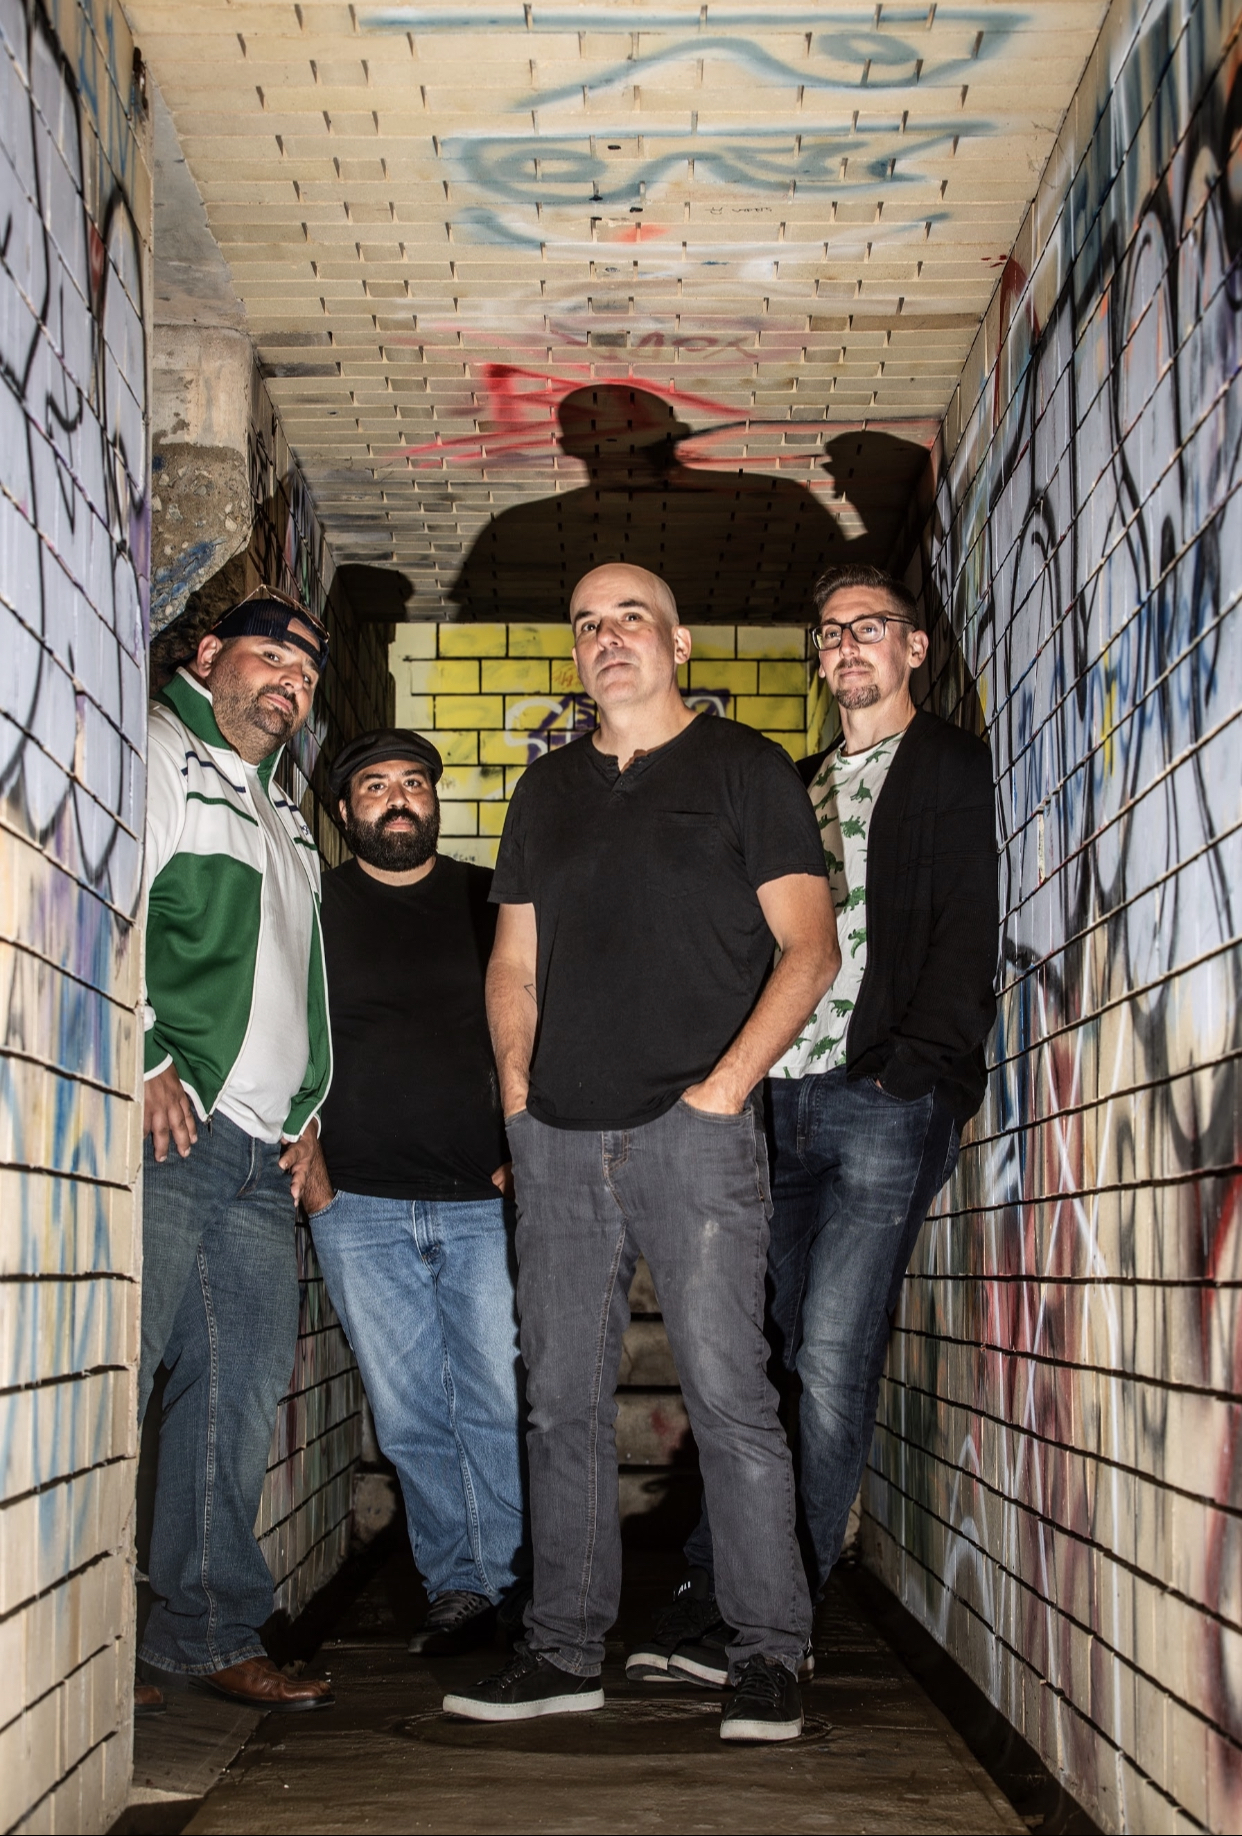 The Freight – ‘Found’ Single Released!